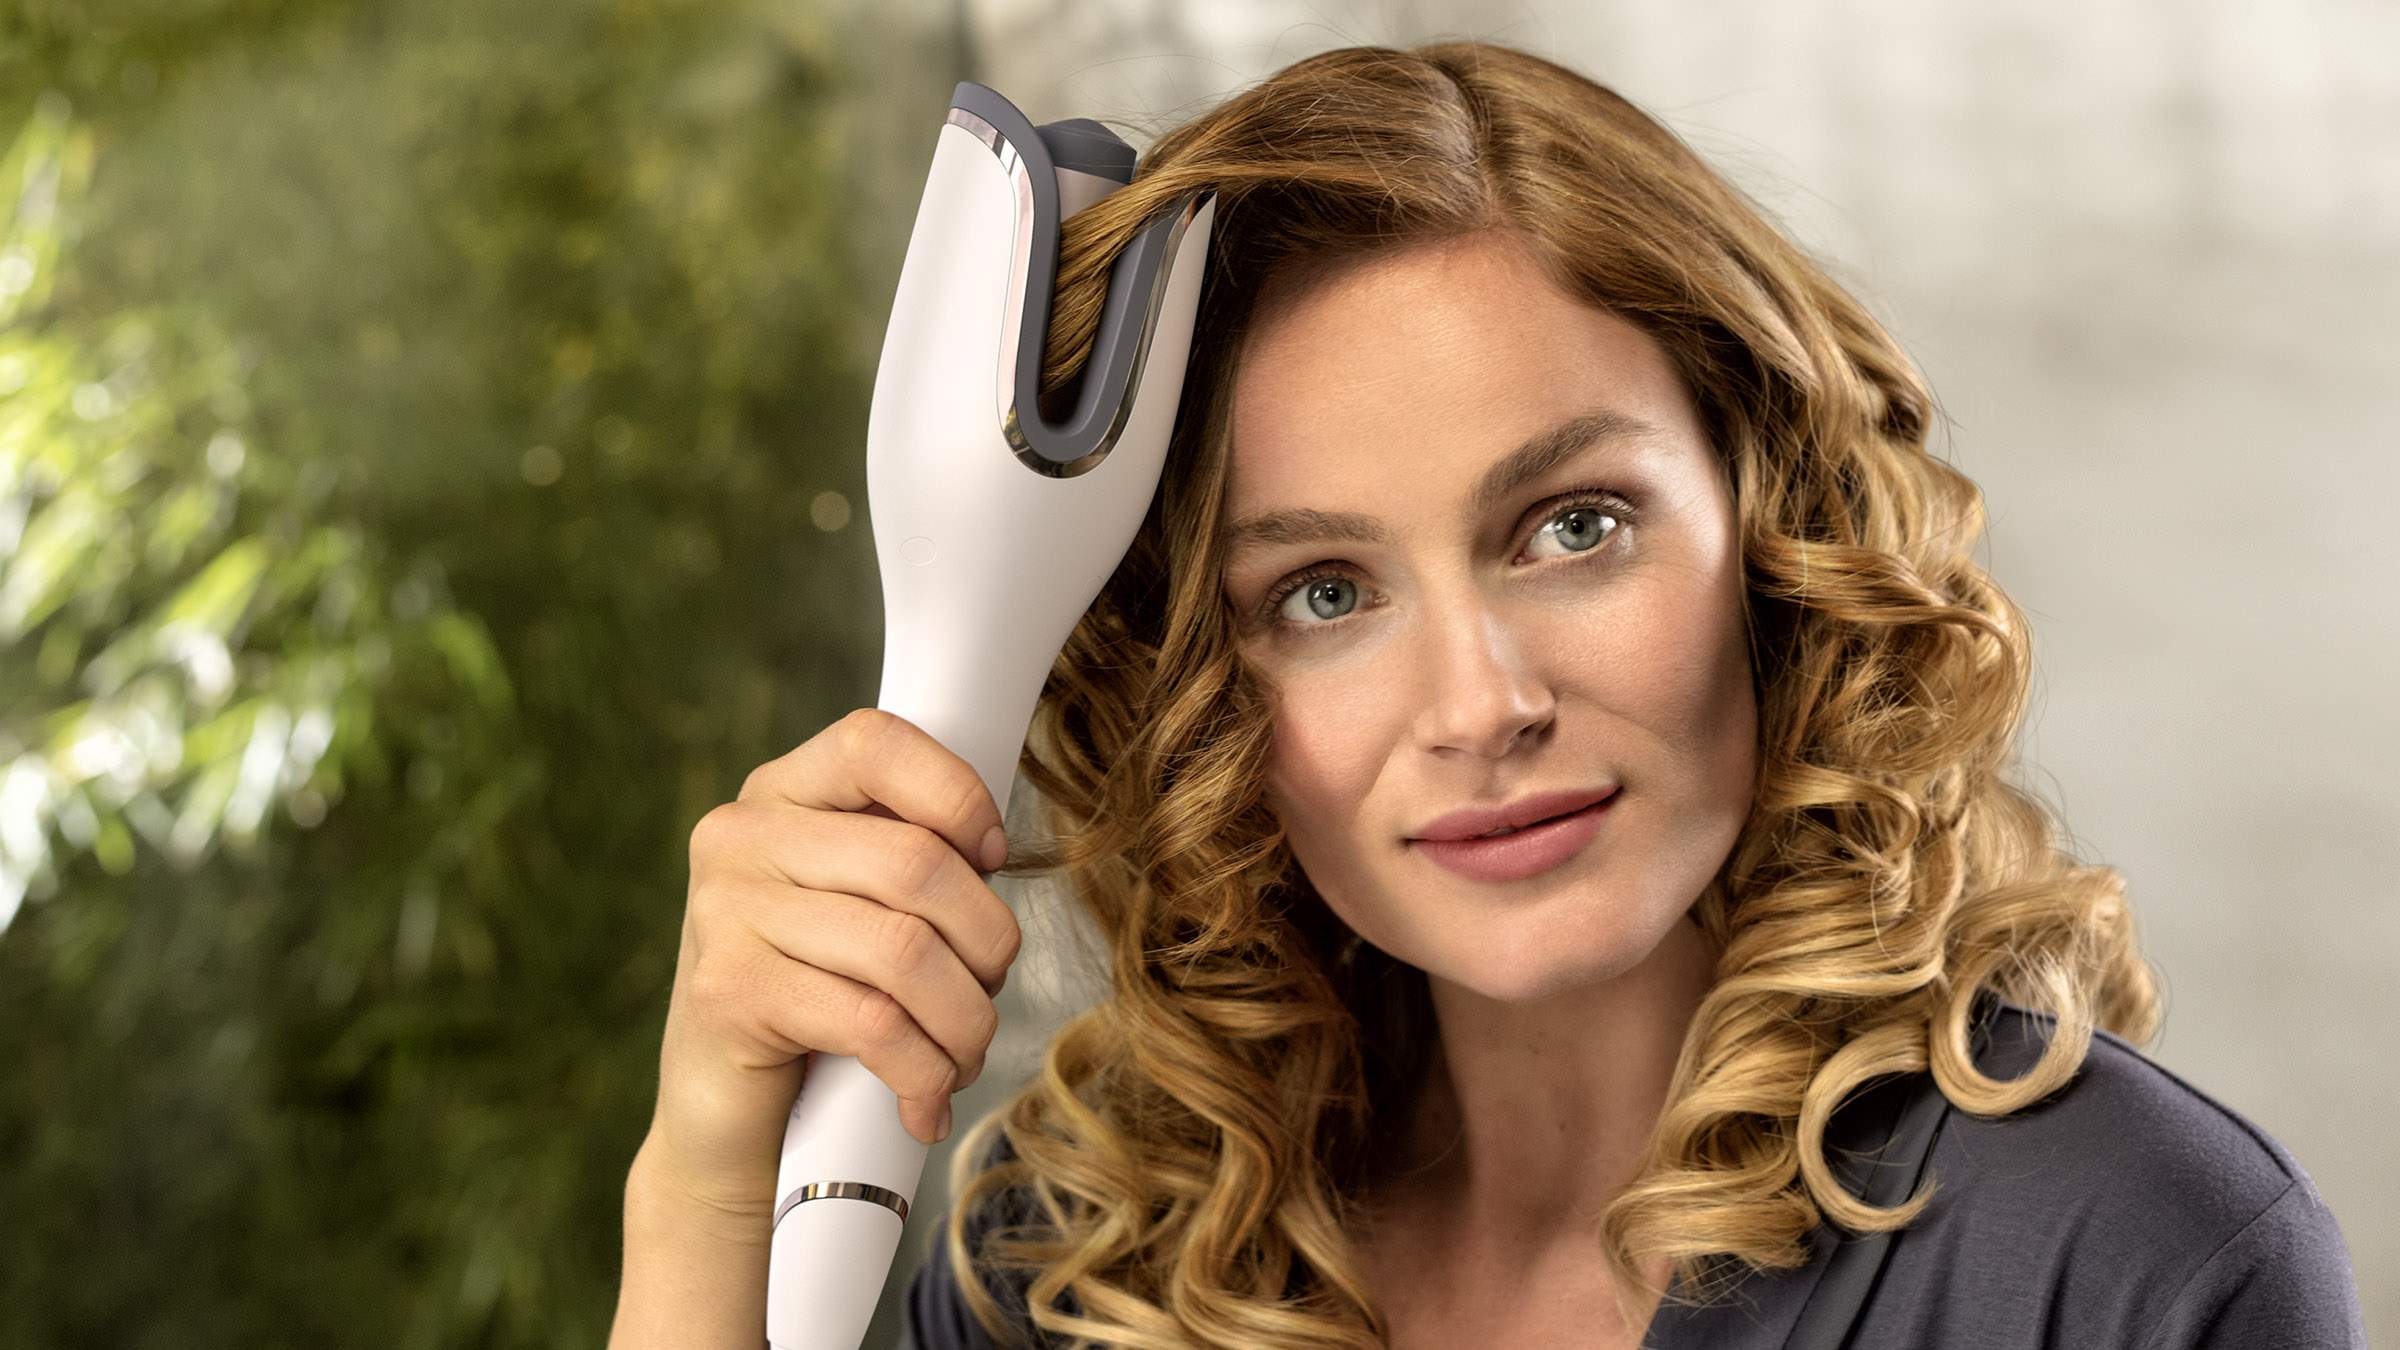 philips moistureprotect auto curler bhb878 00 lifestyle03 pe cl 20191112.download